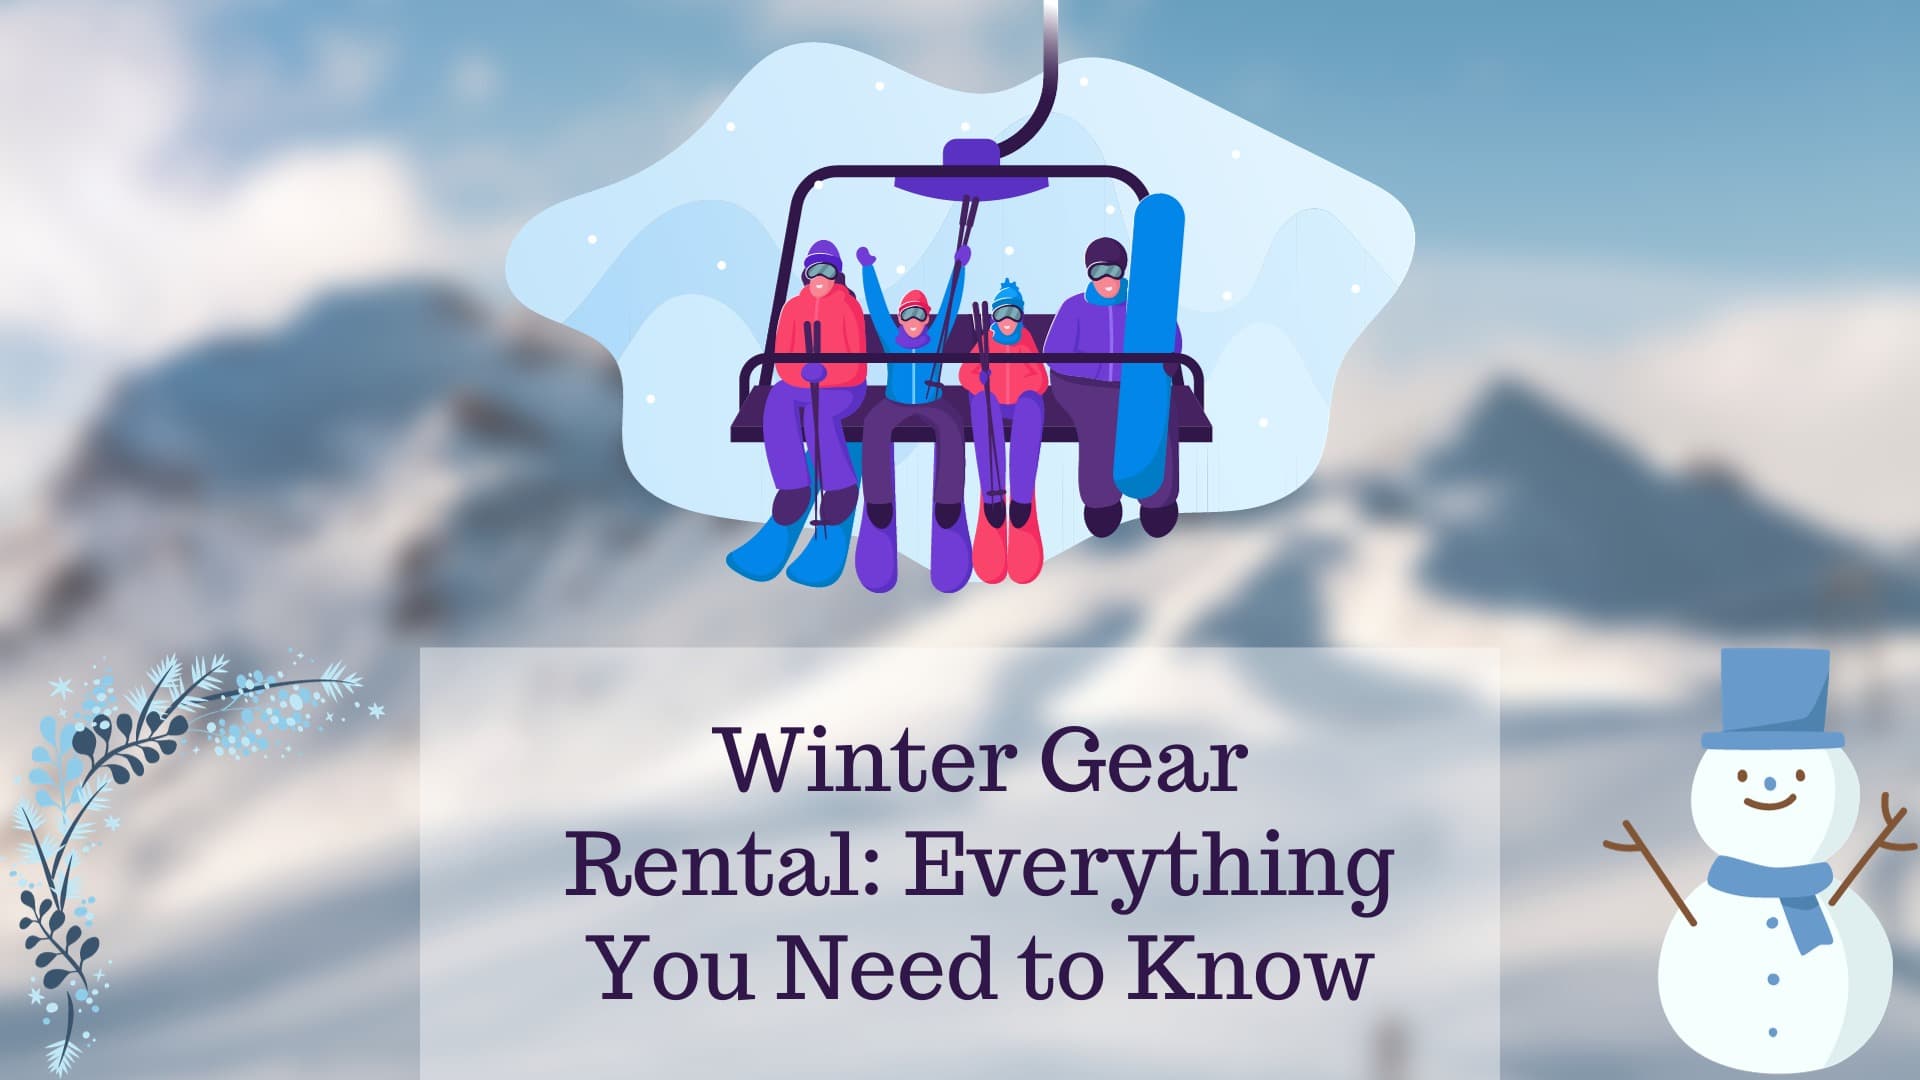 Winter Gear Rental: Everything You Need to Know